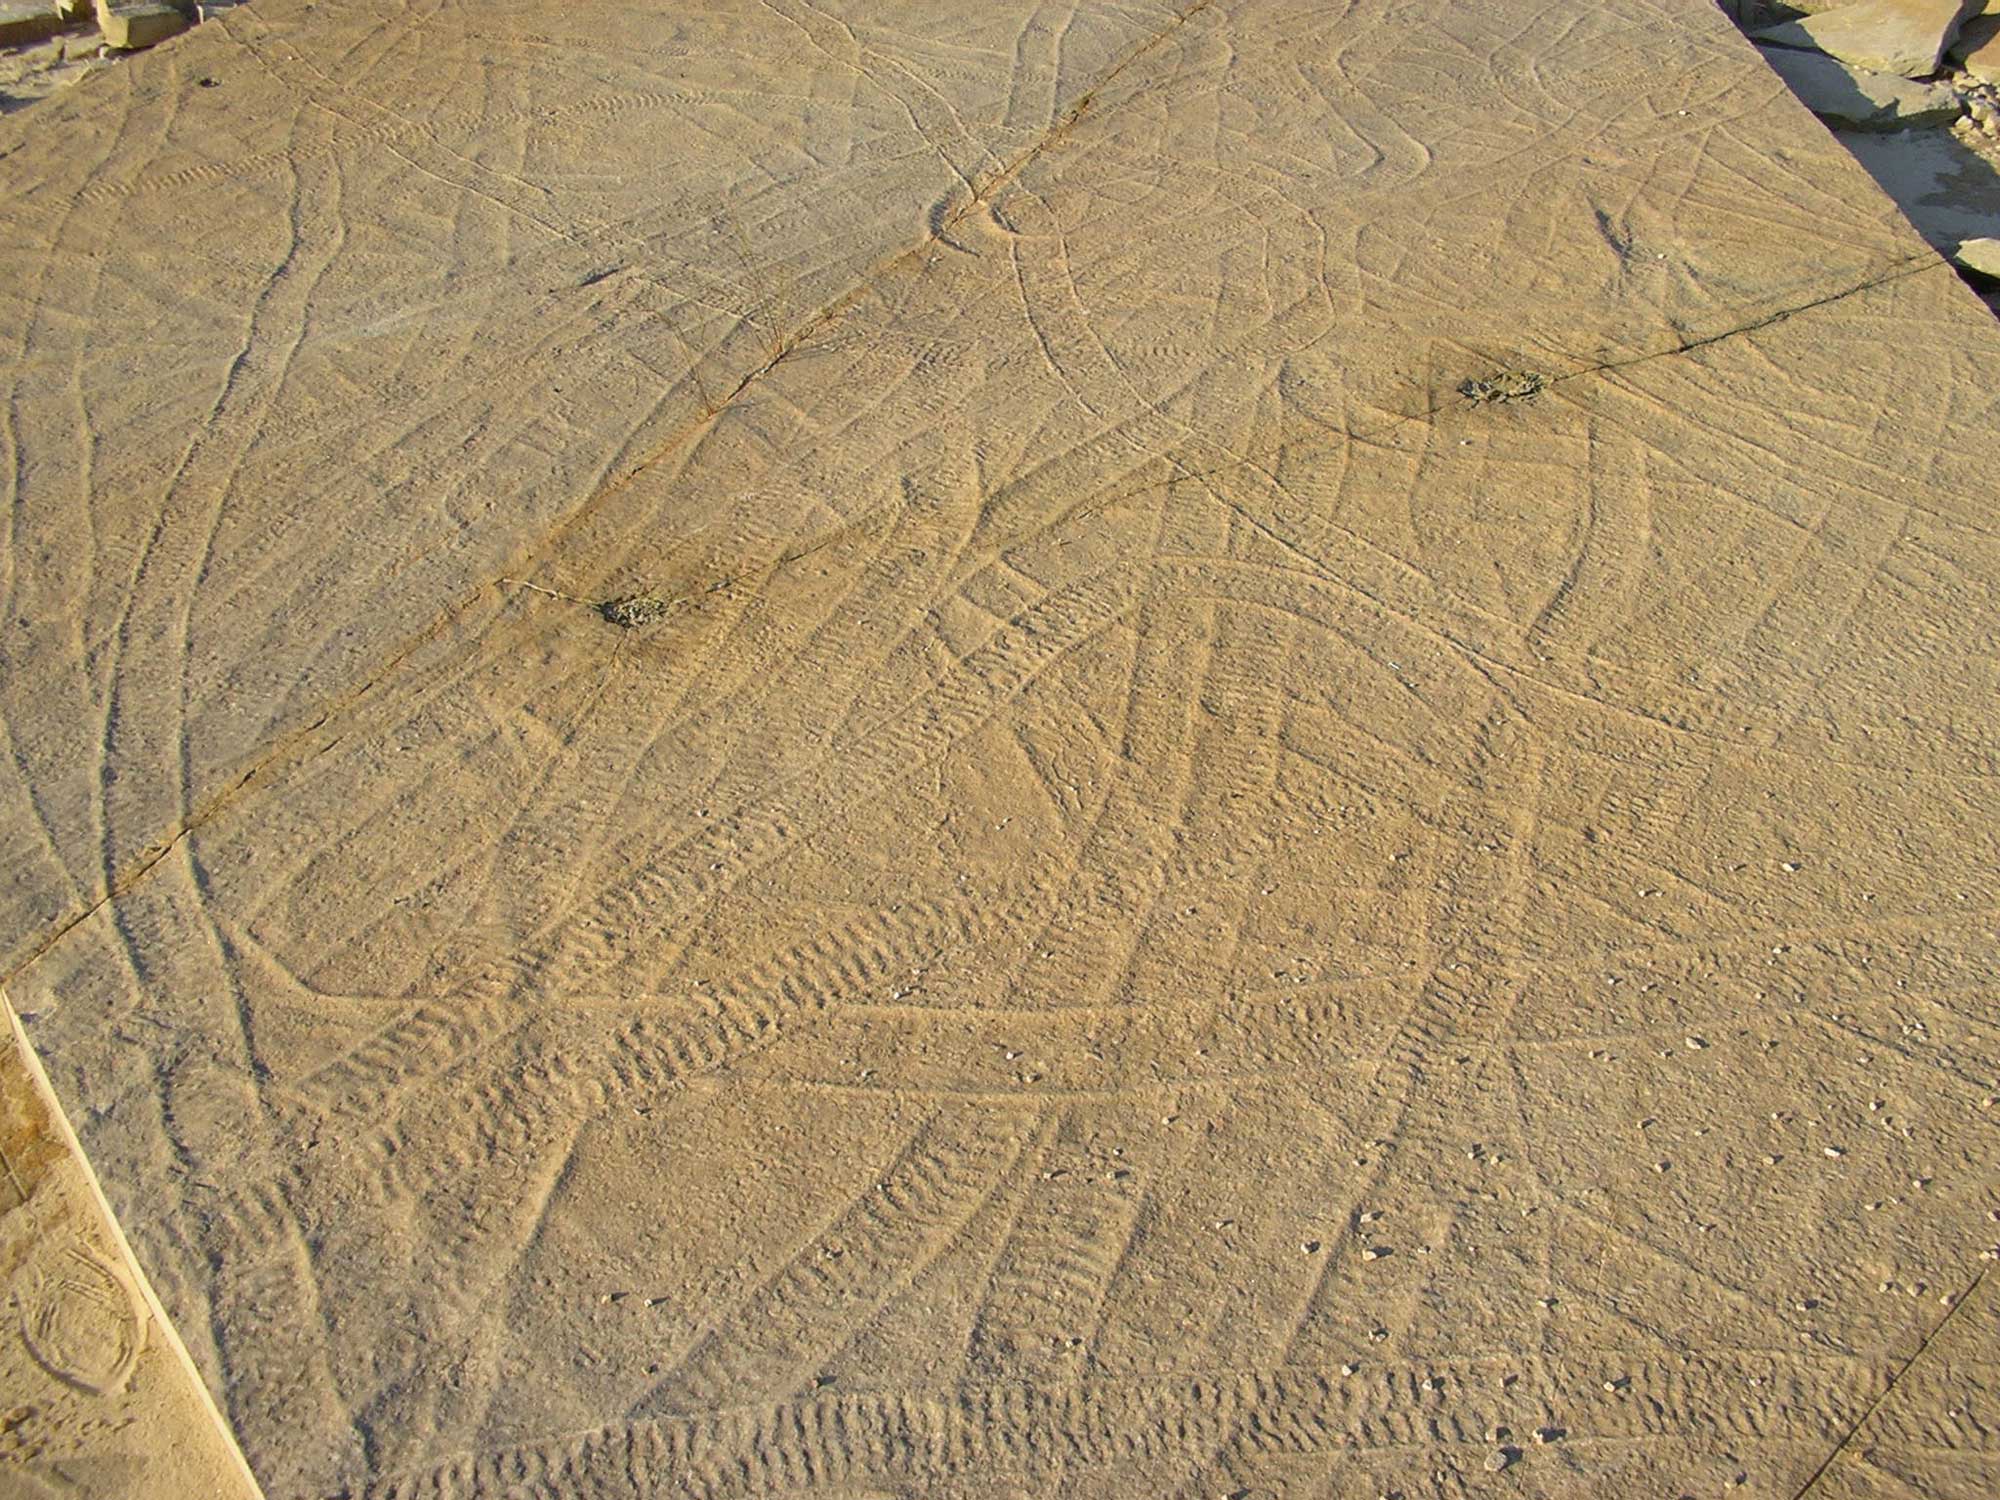 Photograph of the trace fossil Climactichnites from the Cambrian of Wisconsin. The photo shows multiple trackways criss-crossing one another on the surface of a beige rock. Each trackway consists of two parallel lines with light ridges running perpendicularly between them.